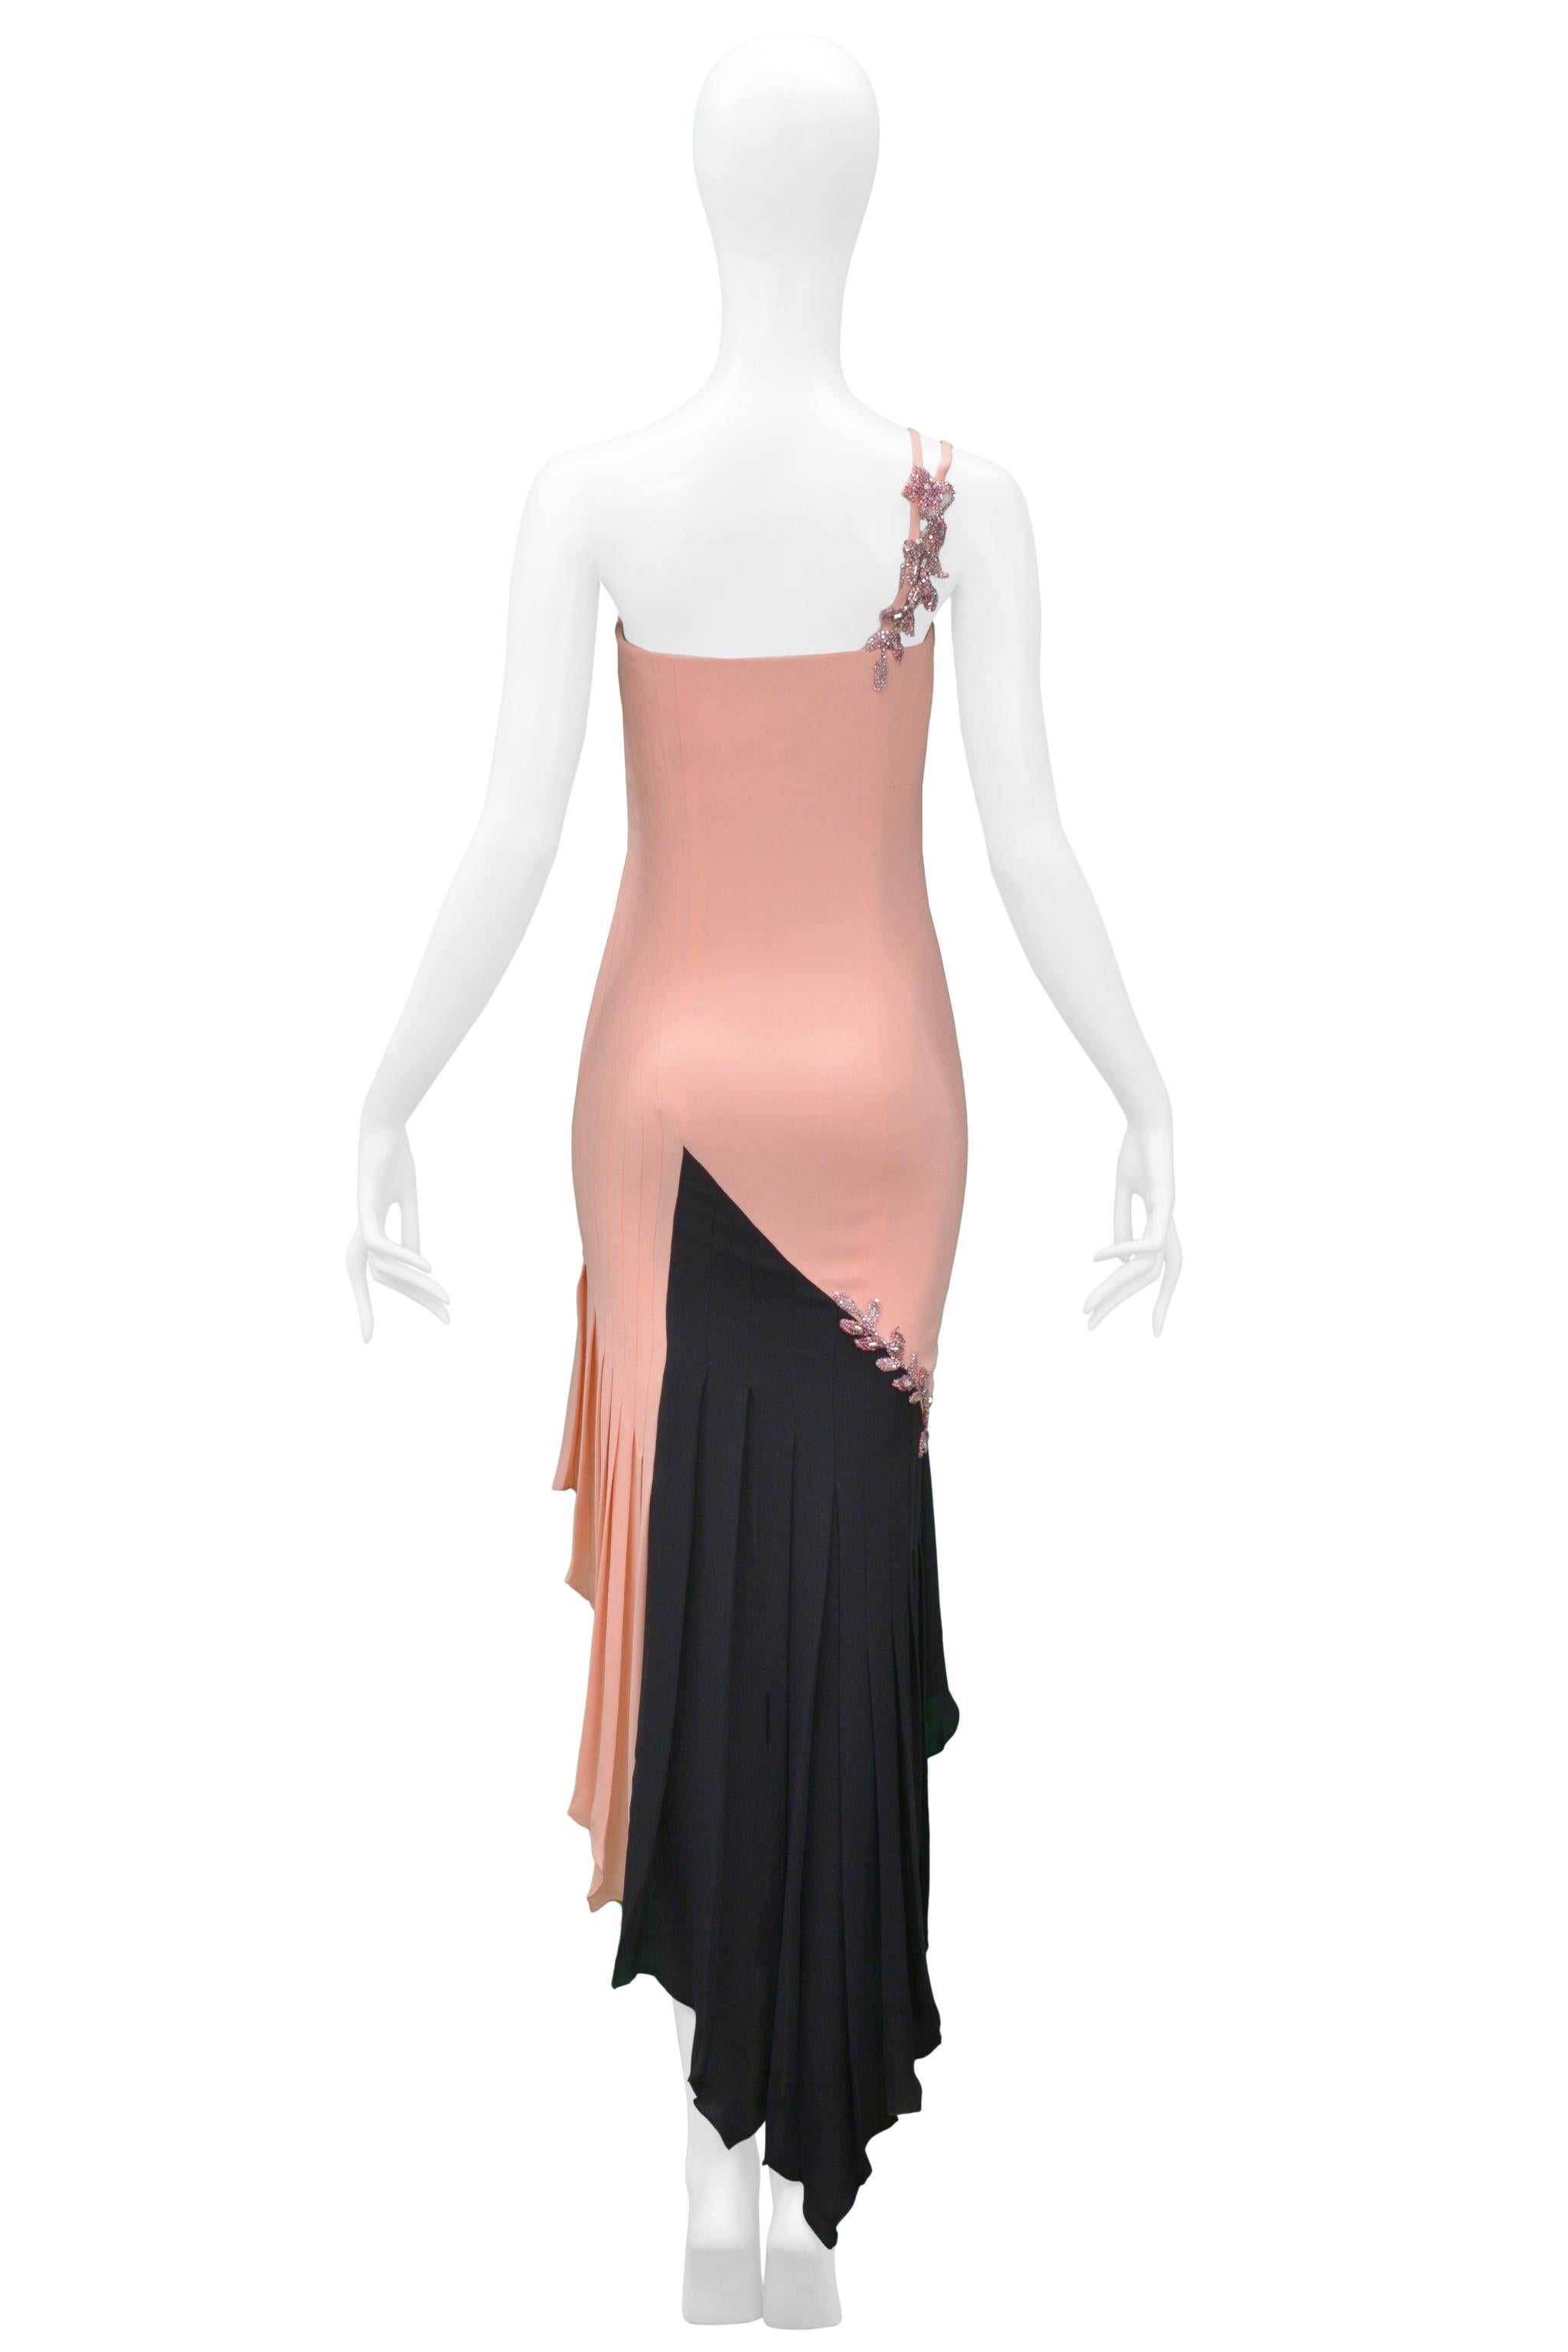 Beige Versace Couture Pink & Black Beaded Dress With Rhinestones C. 1997 For Sale